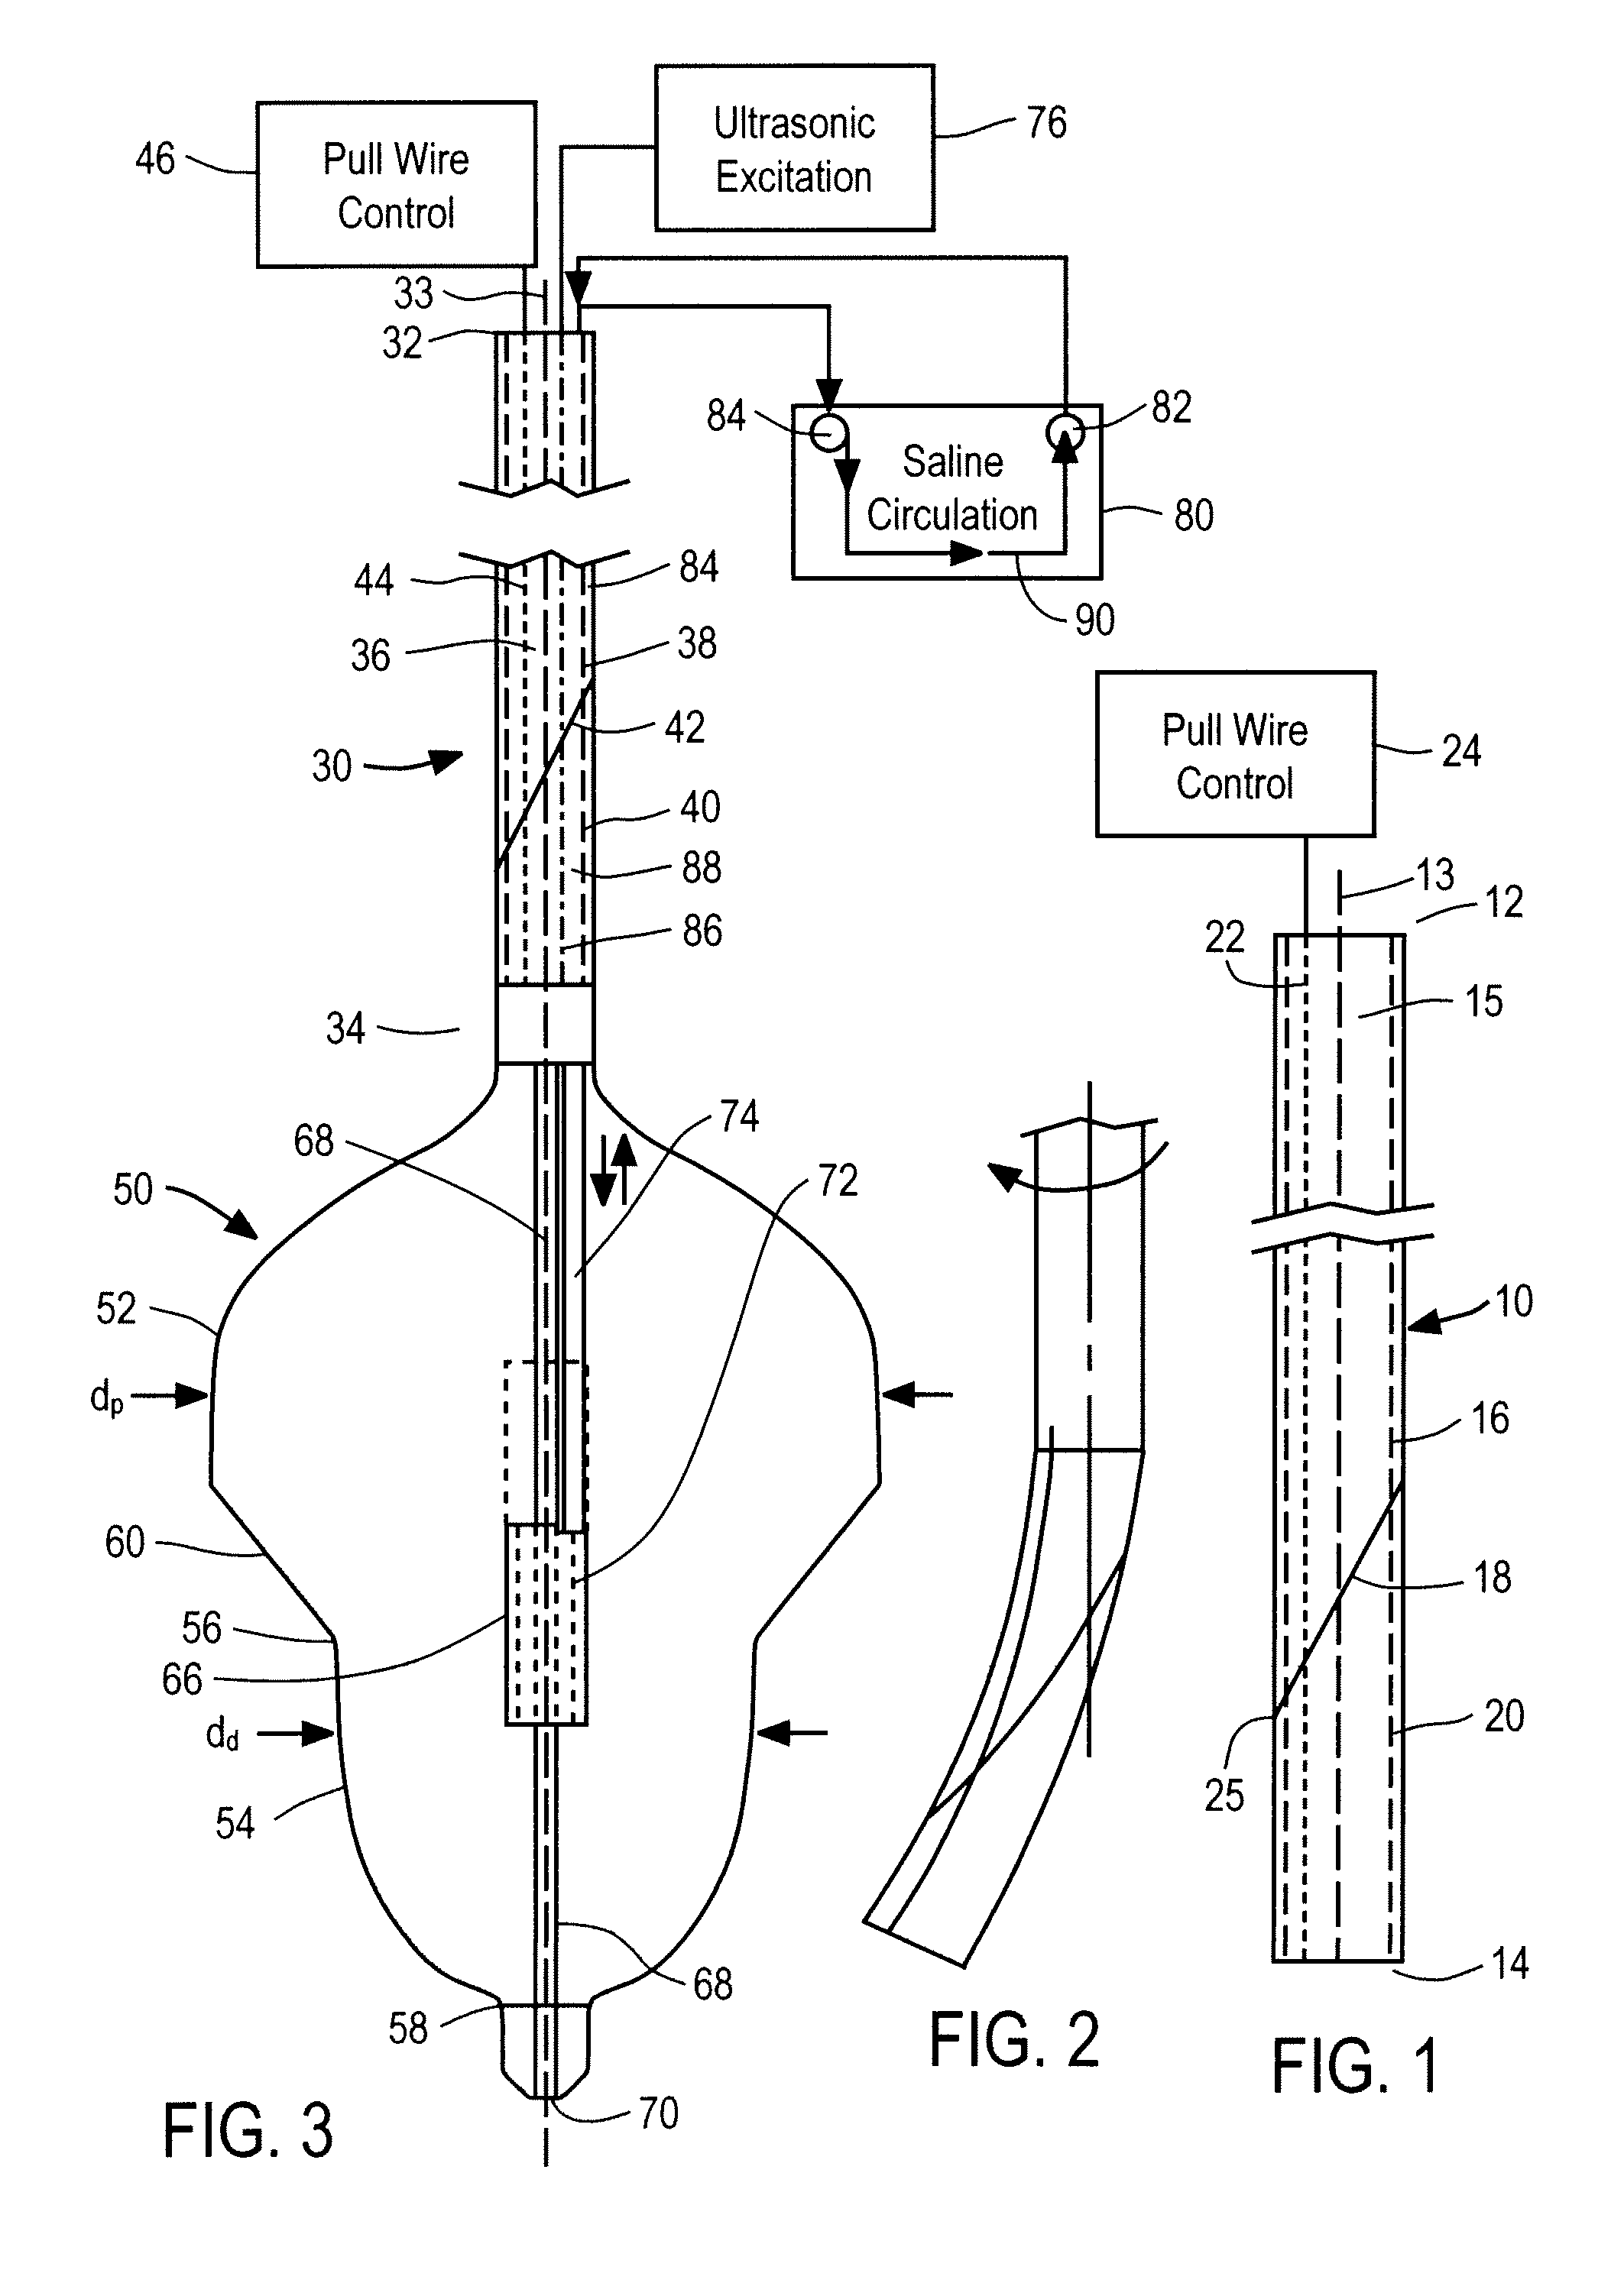 Methods and apparatus for treatment of cardiac valve insufficiency